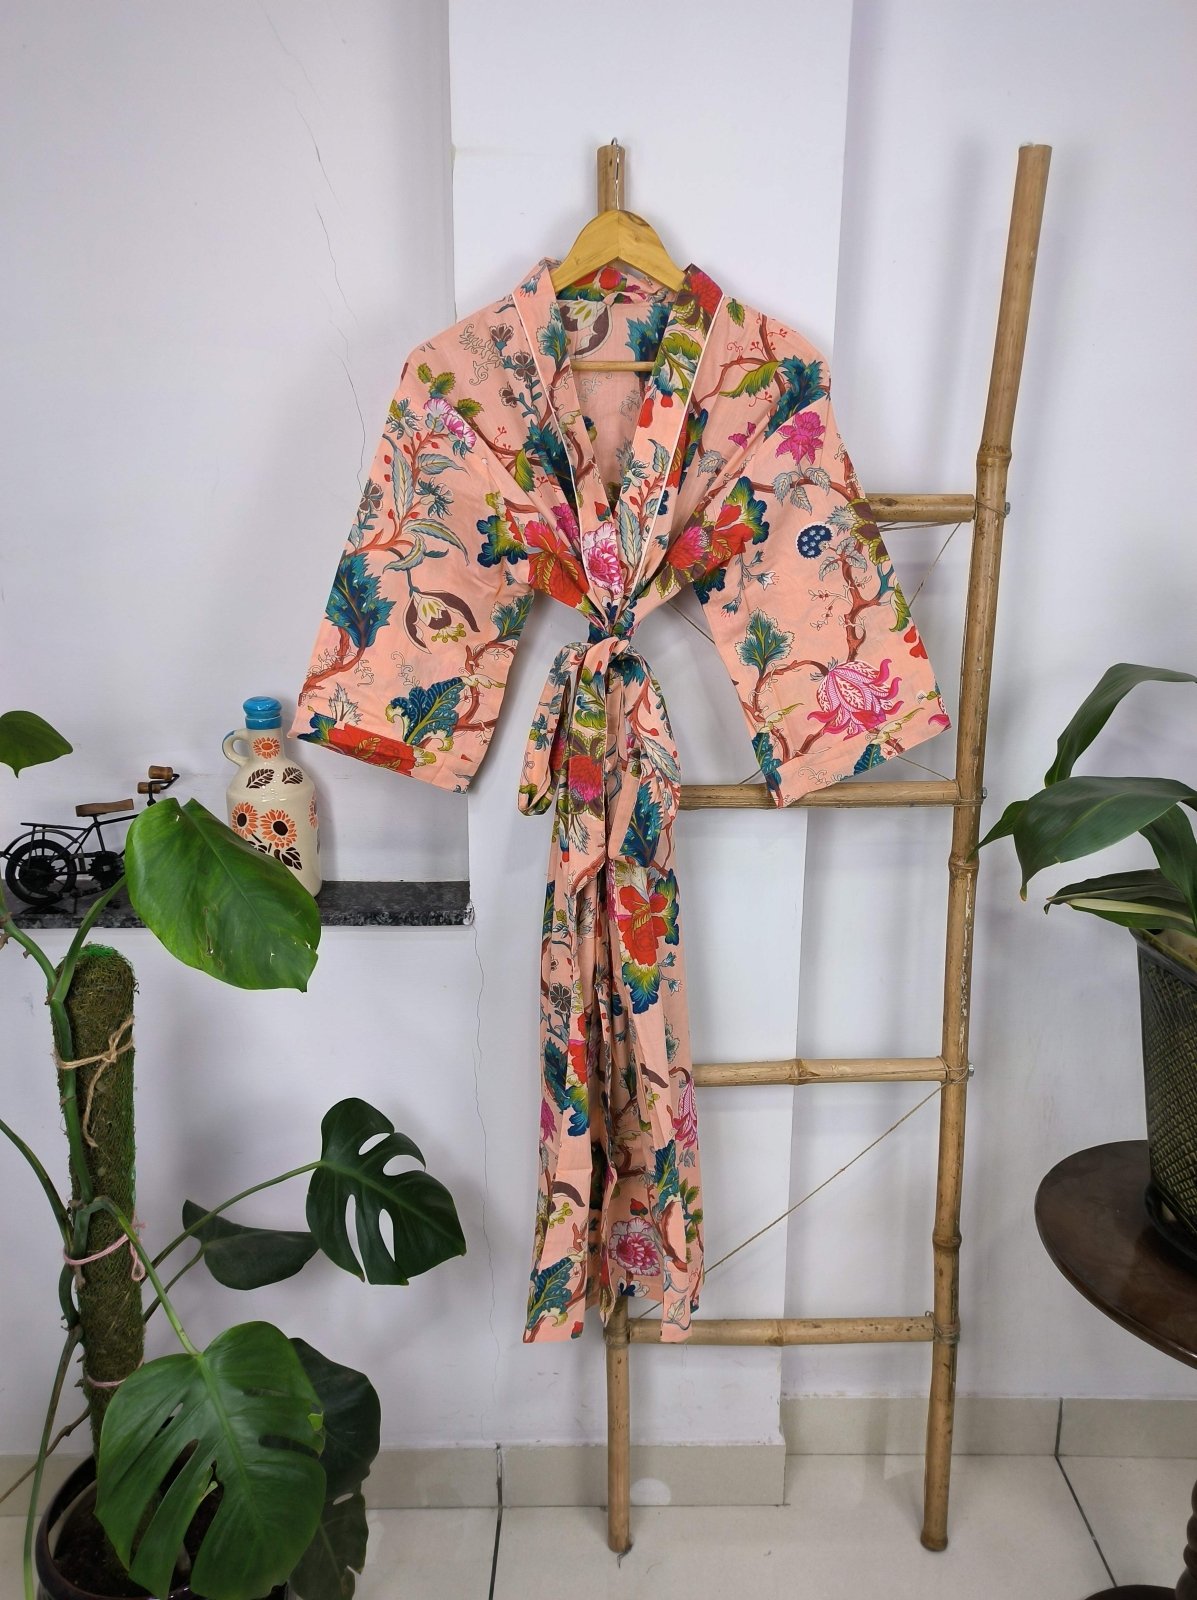 Boho House Robe Indian Handprinted Cotton Kimono Botanical Patter | Perfect for Summer Luxury Beach Holidays Yacht Cover Up Stunning Dress - The Eastern Loom